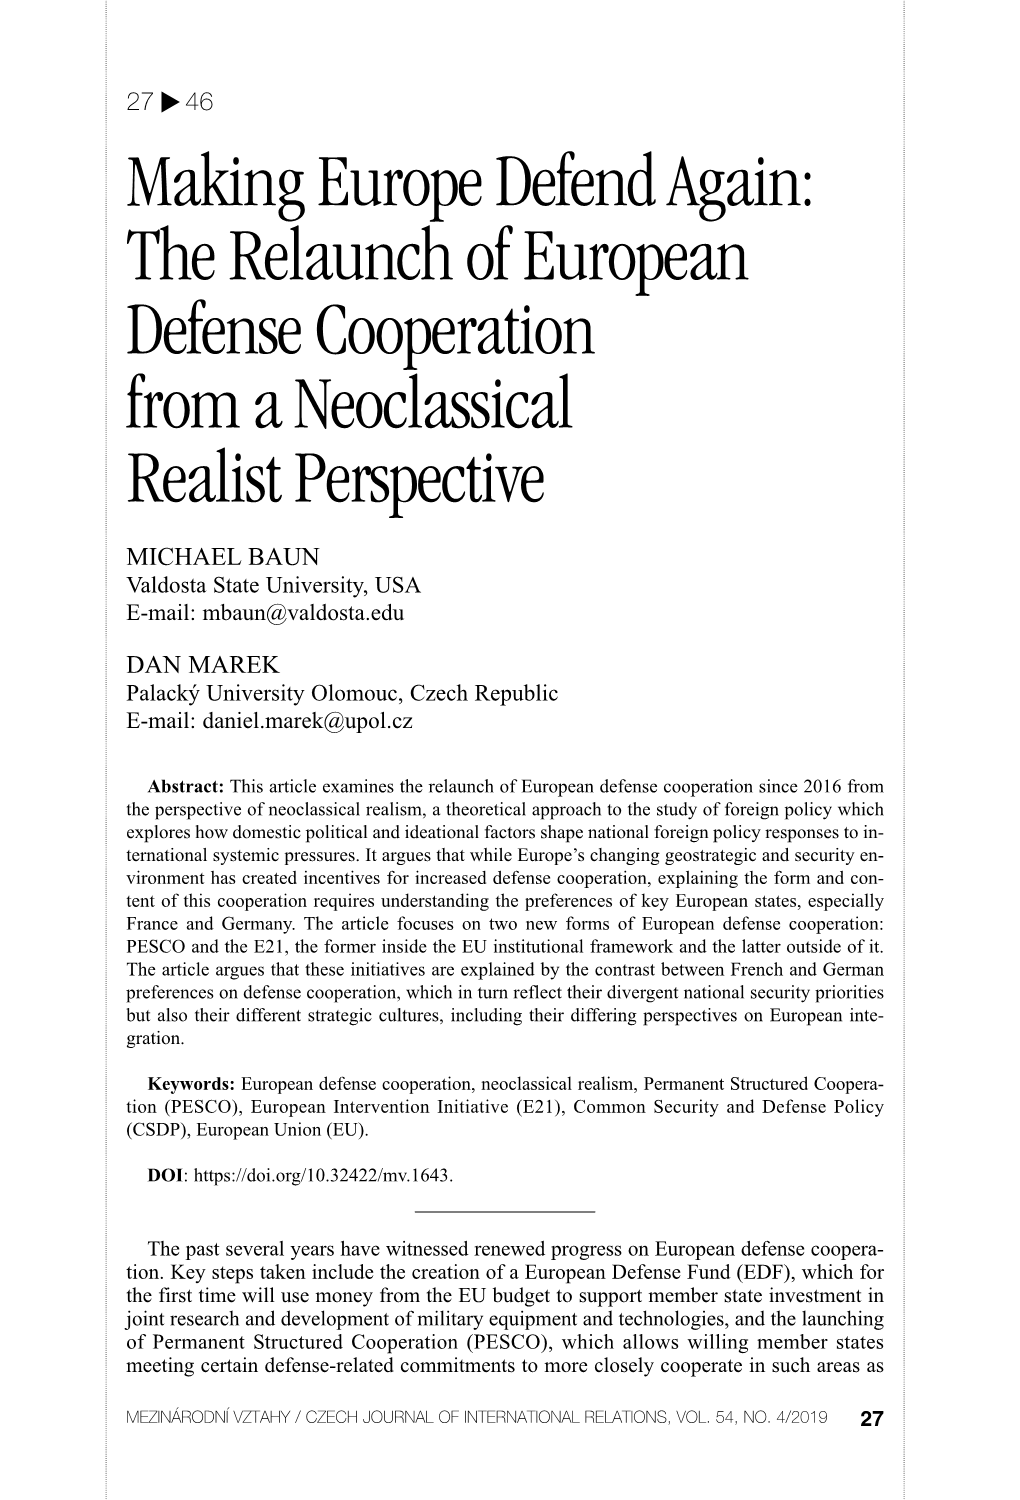 The Relaunch of European Defense Cooperation from a Neoclassical Realist Perspective